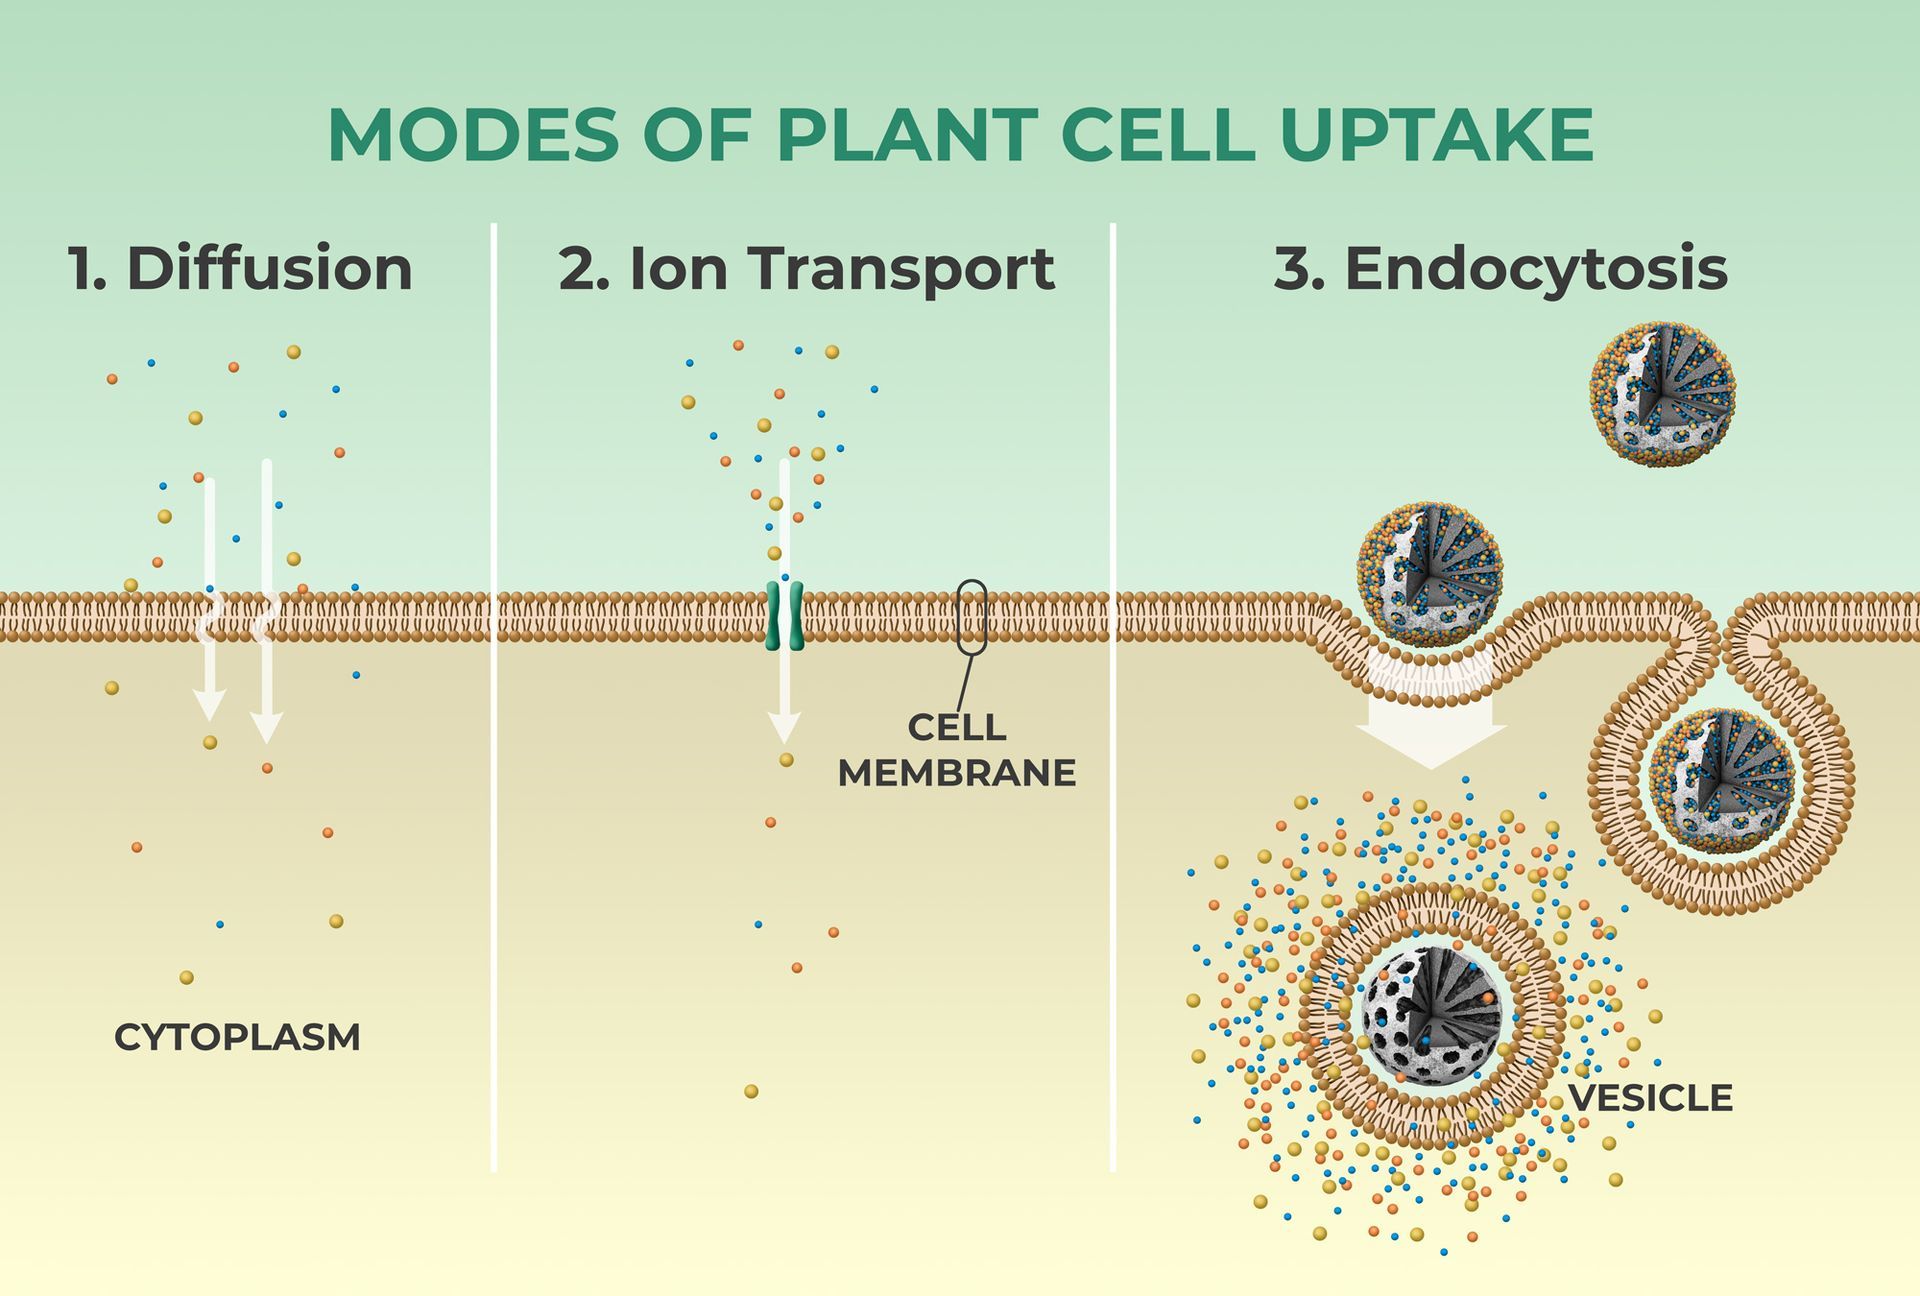 Modes of Plant Cell Uptake